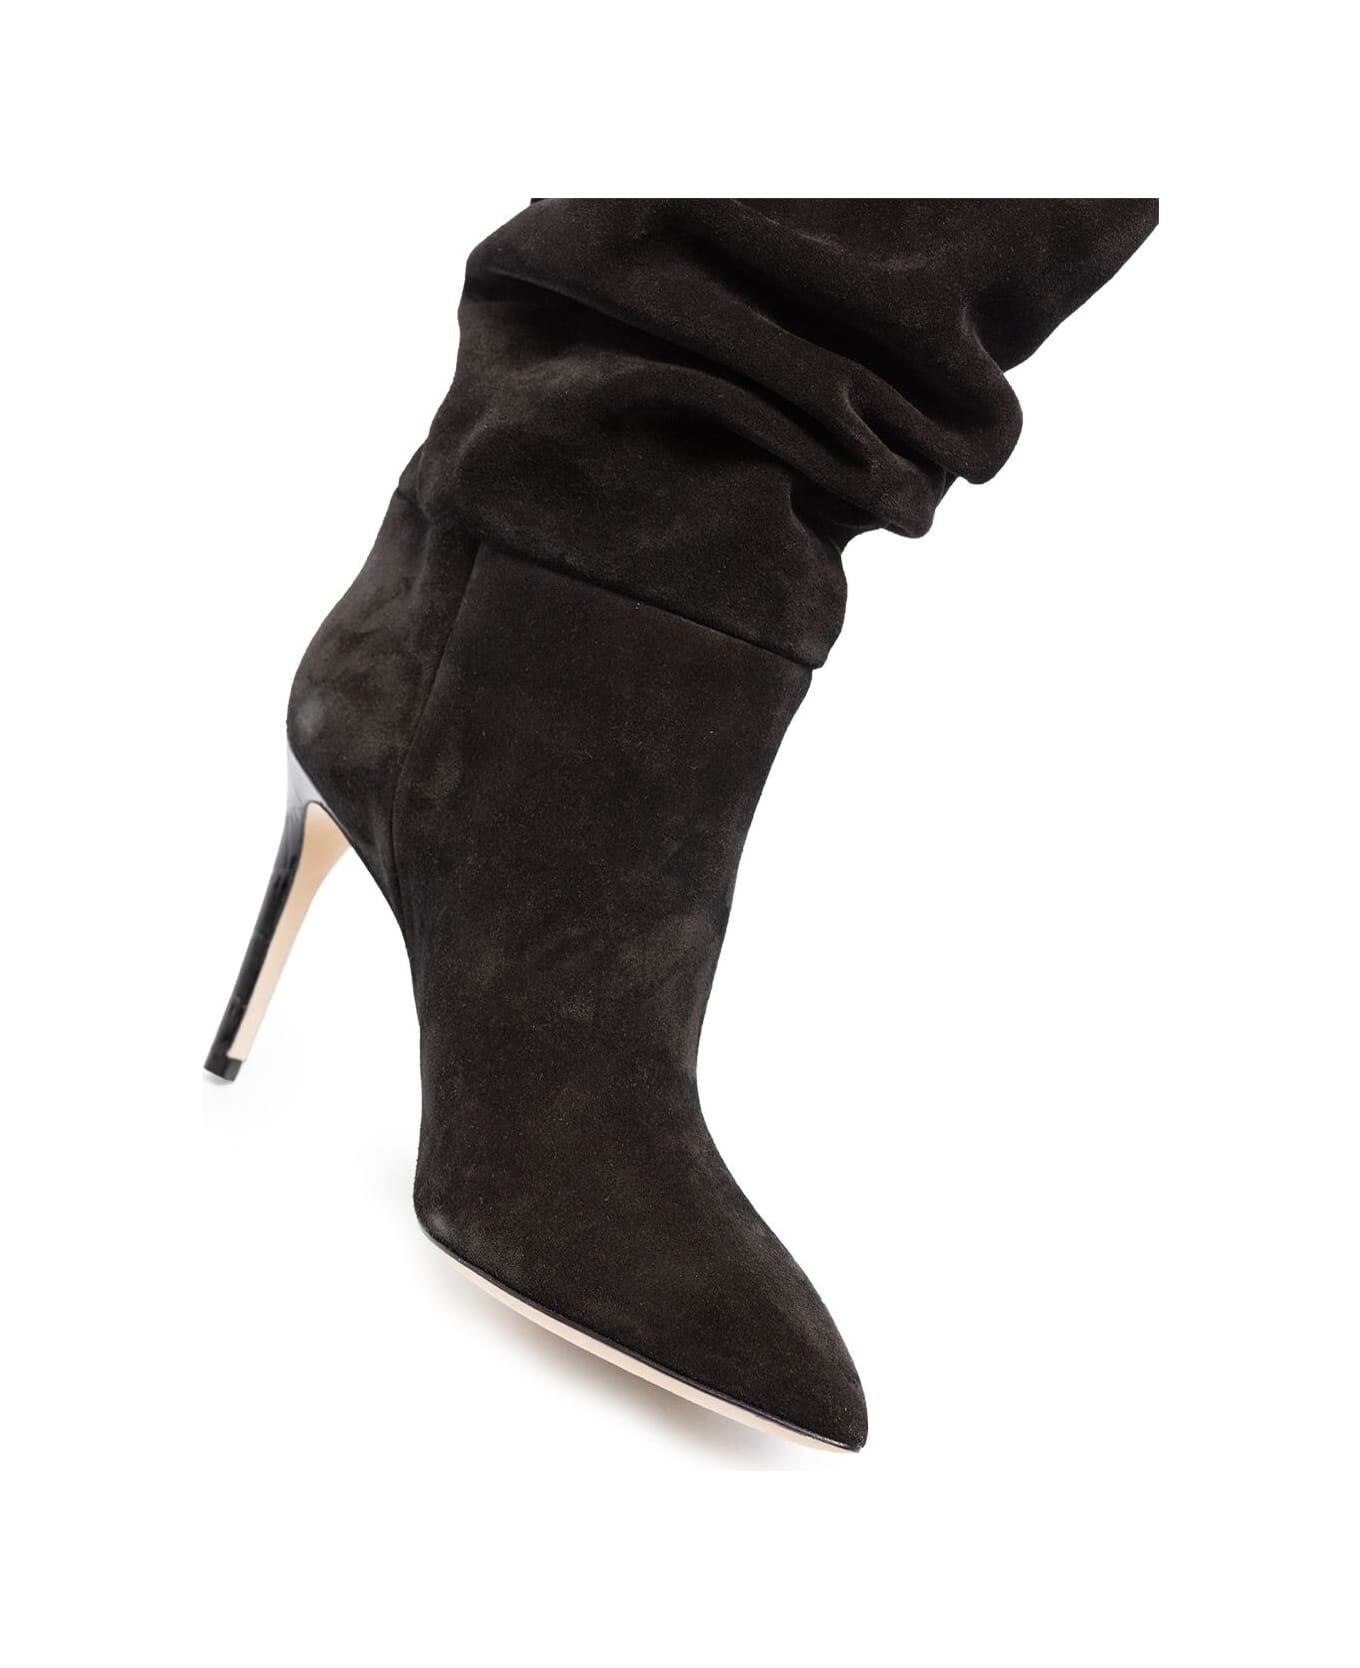 Paris Texas Black Slouchy Pointed Boots With Stiletto Heel In Suede Woman - Black